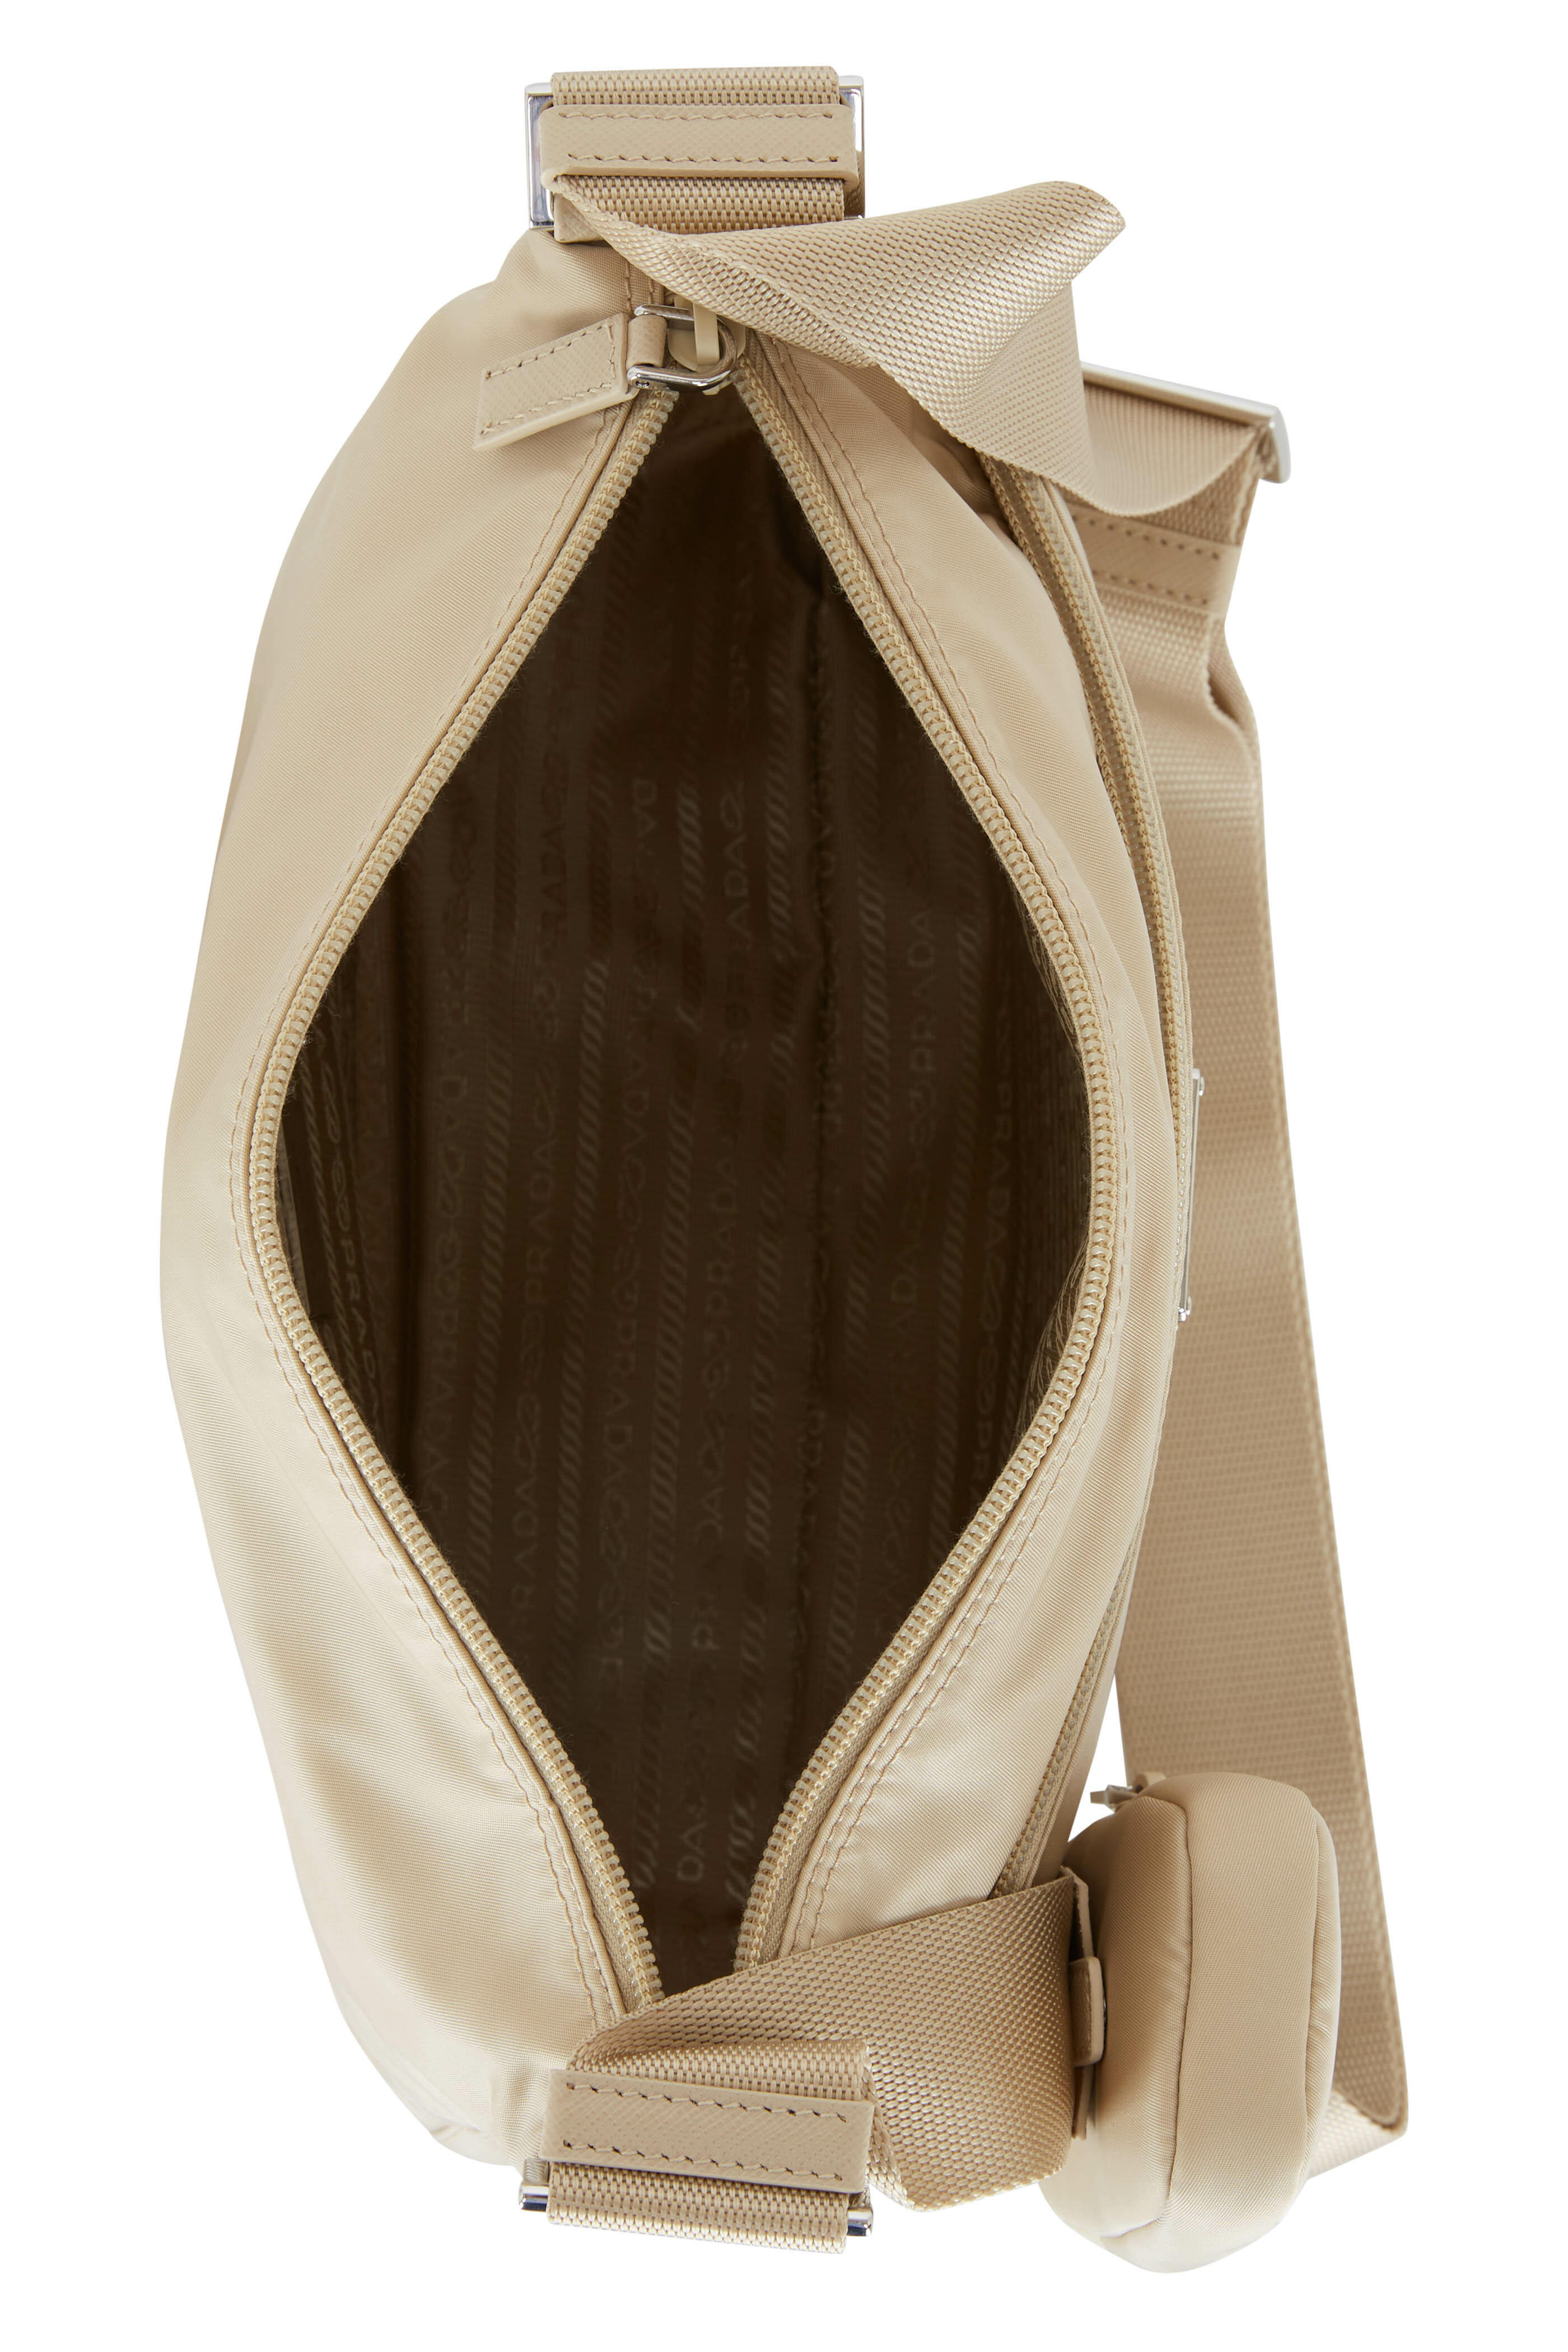 Toile Iconographe Backpack With Leather Detailing for Man in Beige